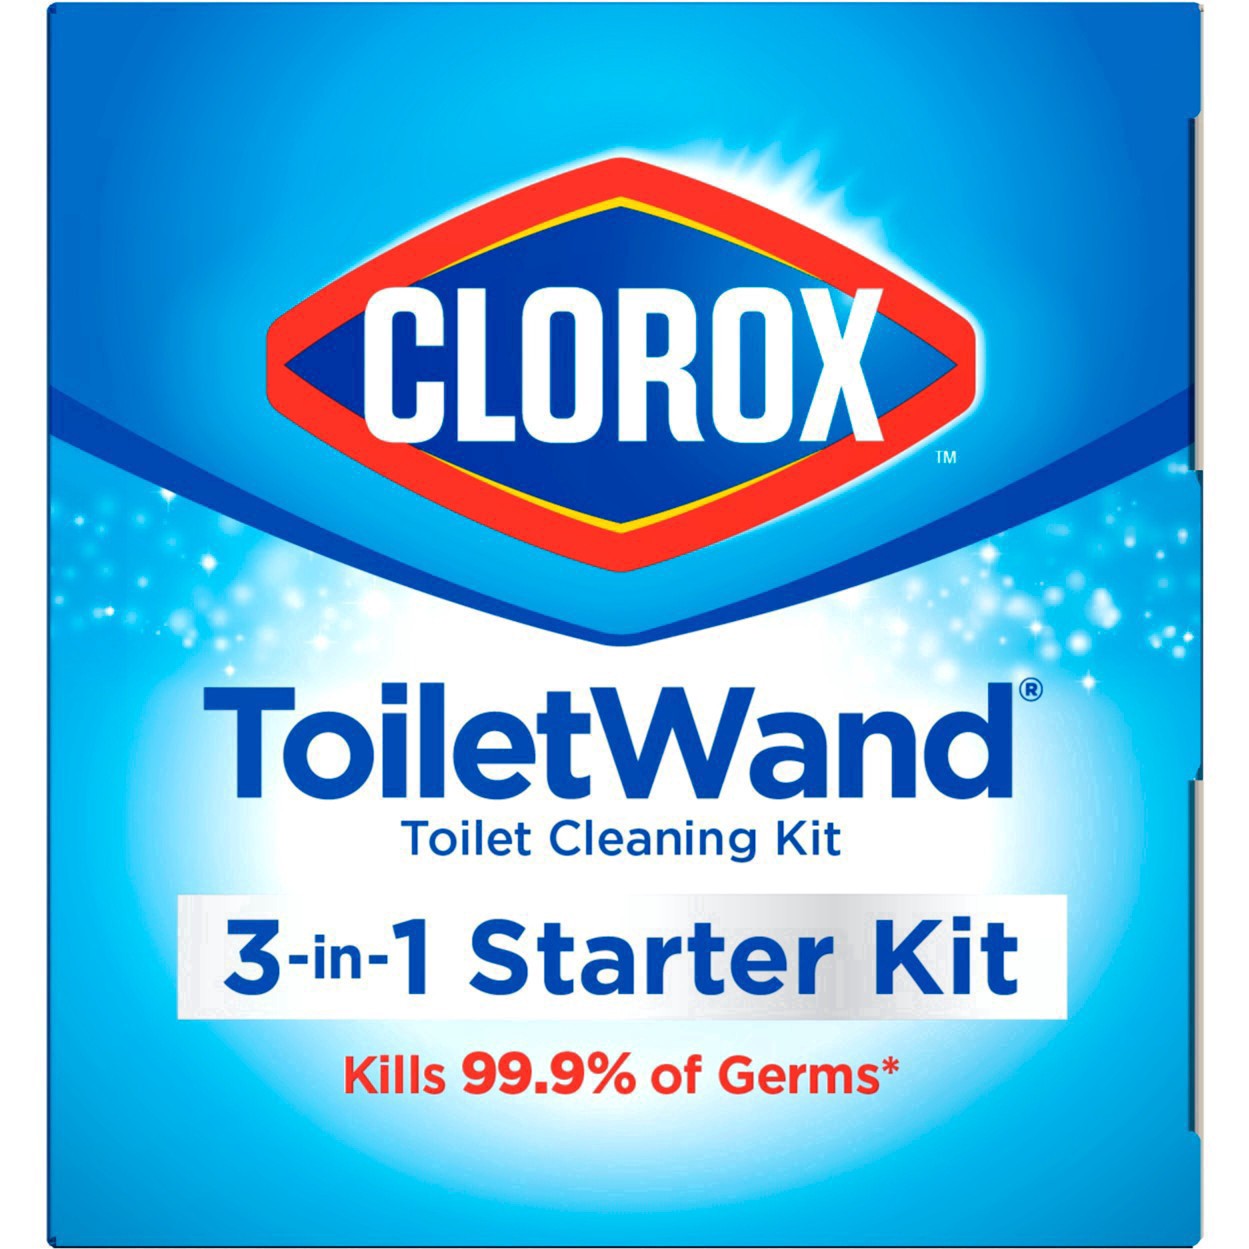 slide 4 of 176, Clorox Toilet Wand 3-in-1 Starter Toliet Cleaning Kit, 1 ct